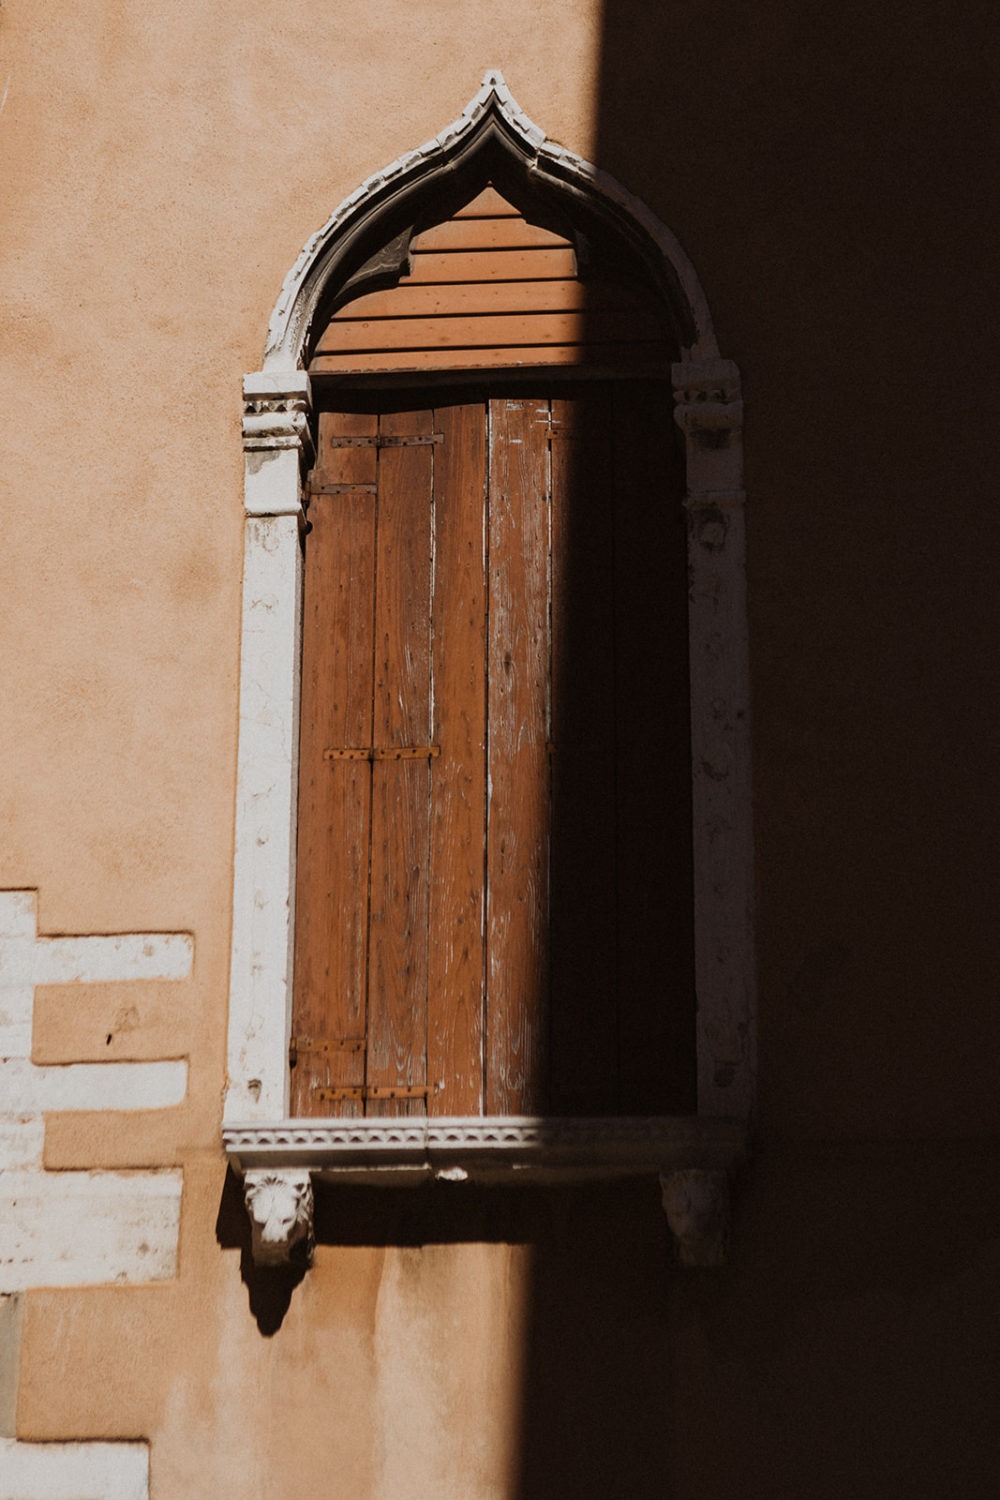 Closed window covered half in shadow in Italy town